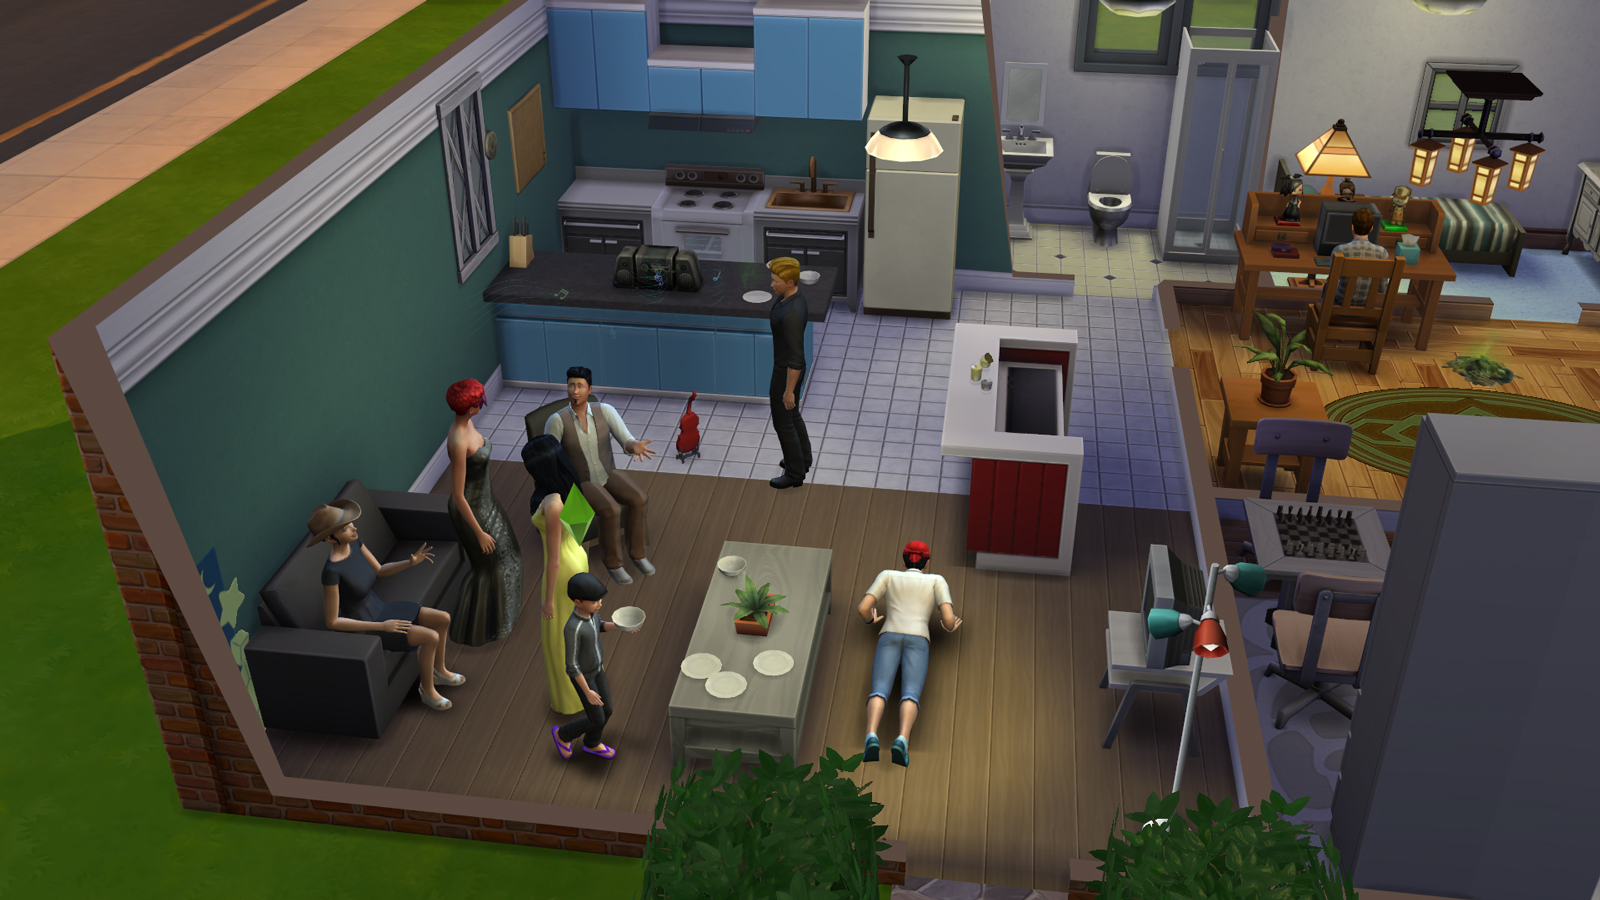 sims 4 demo free download